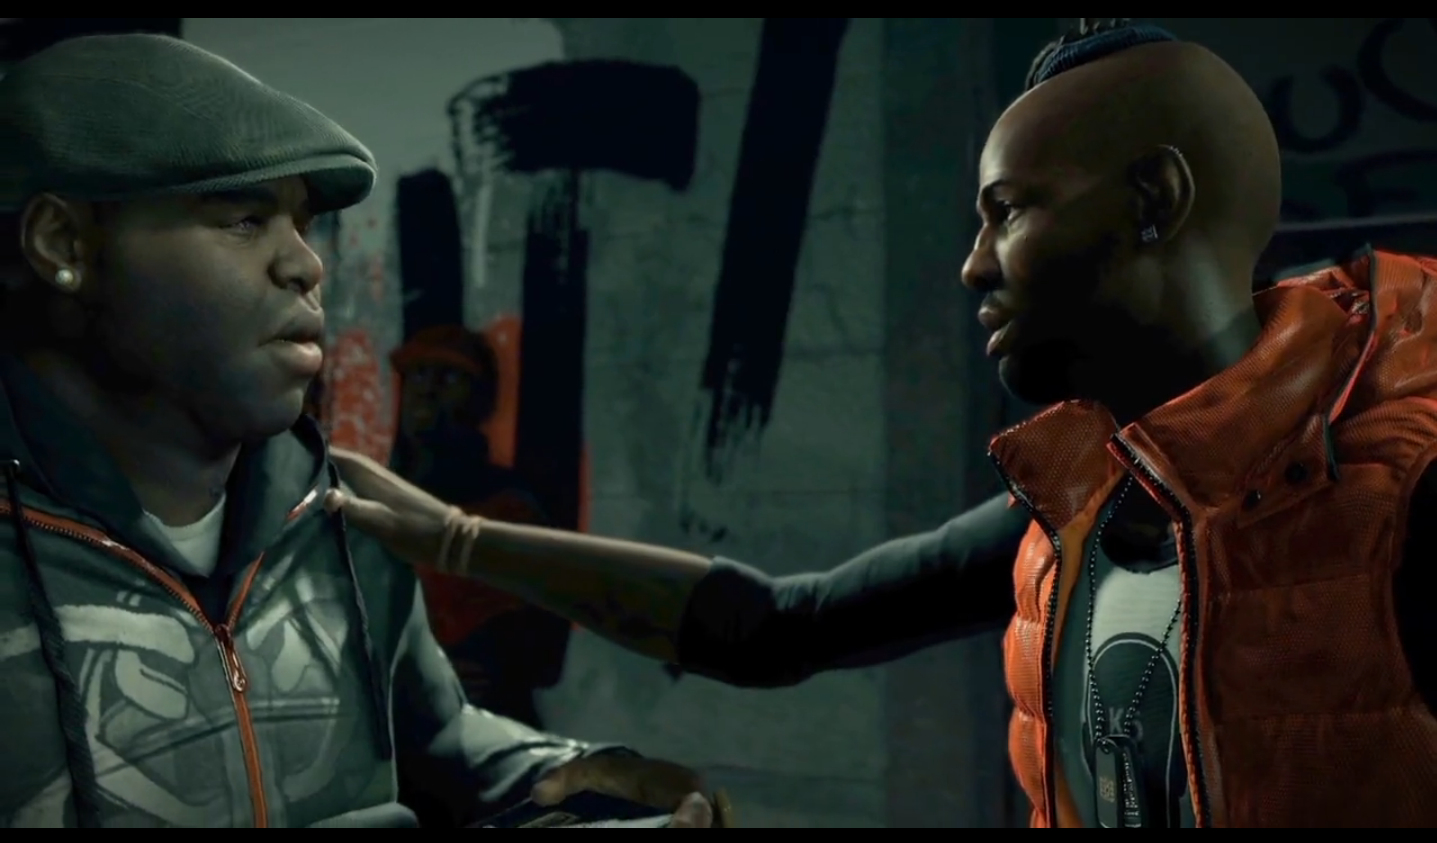 Bed Bug (R. Charles Wilkerson) gets the run down from his older cousin Iraq (Jerod Haynes) in the Ubisoft Video Game, Watch_Dogs